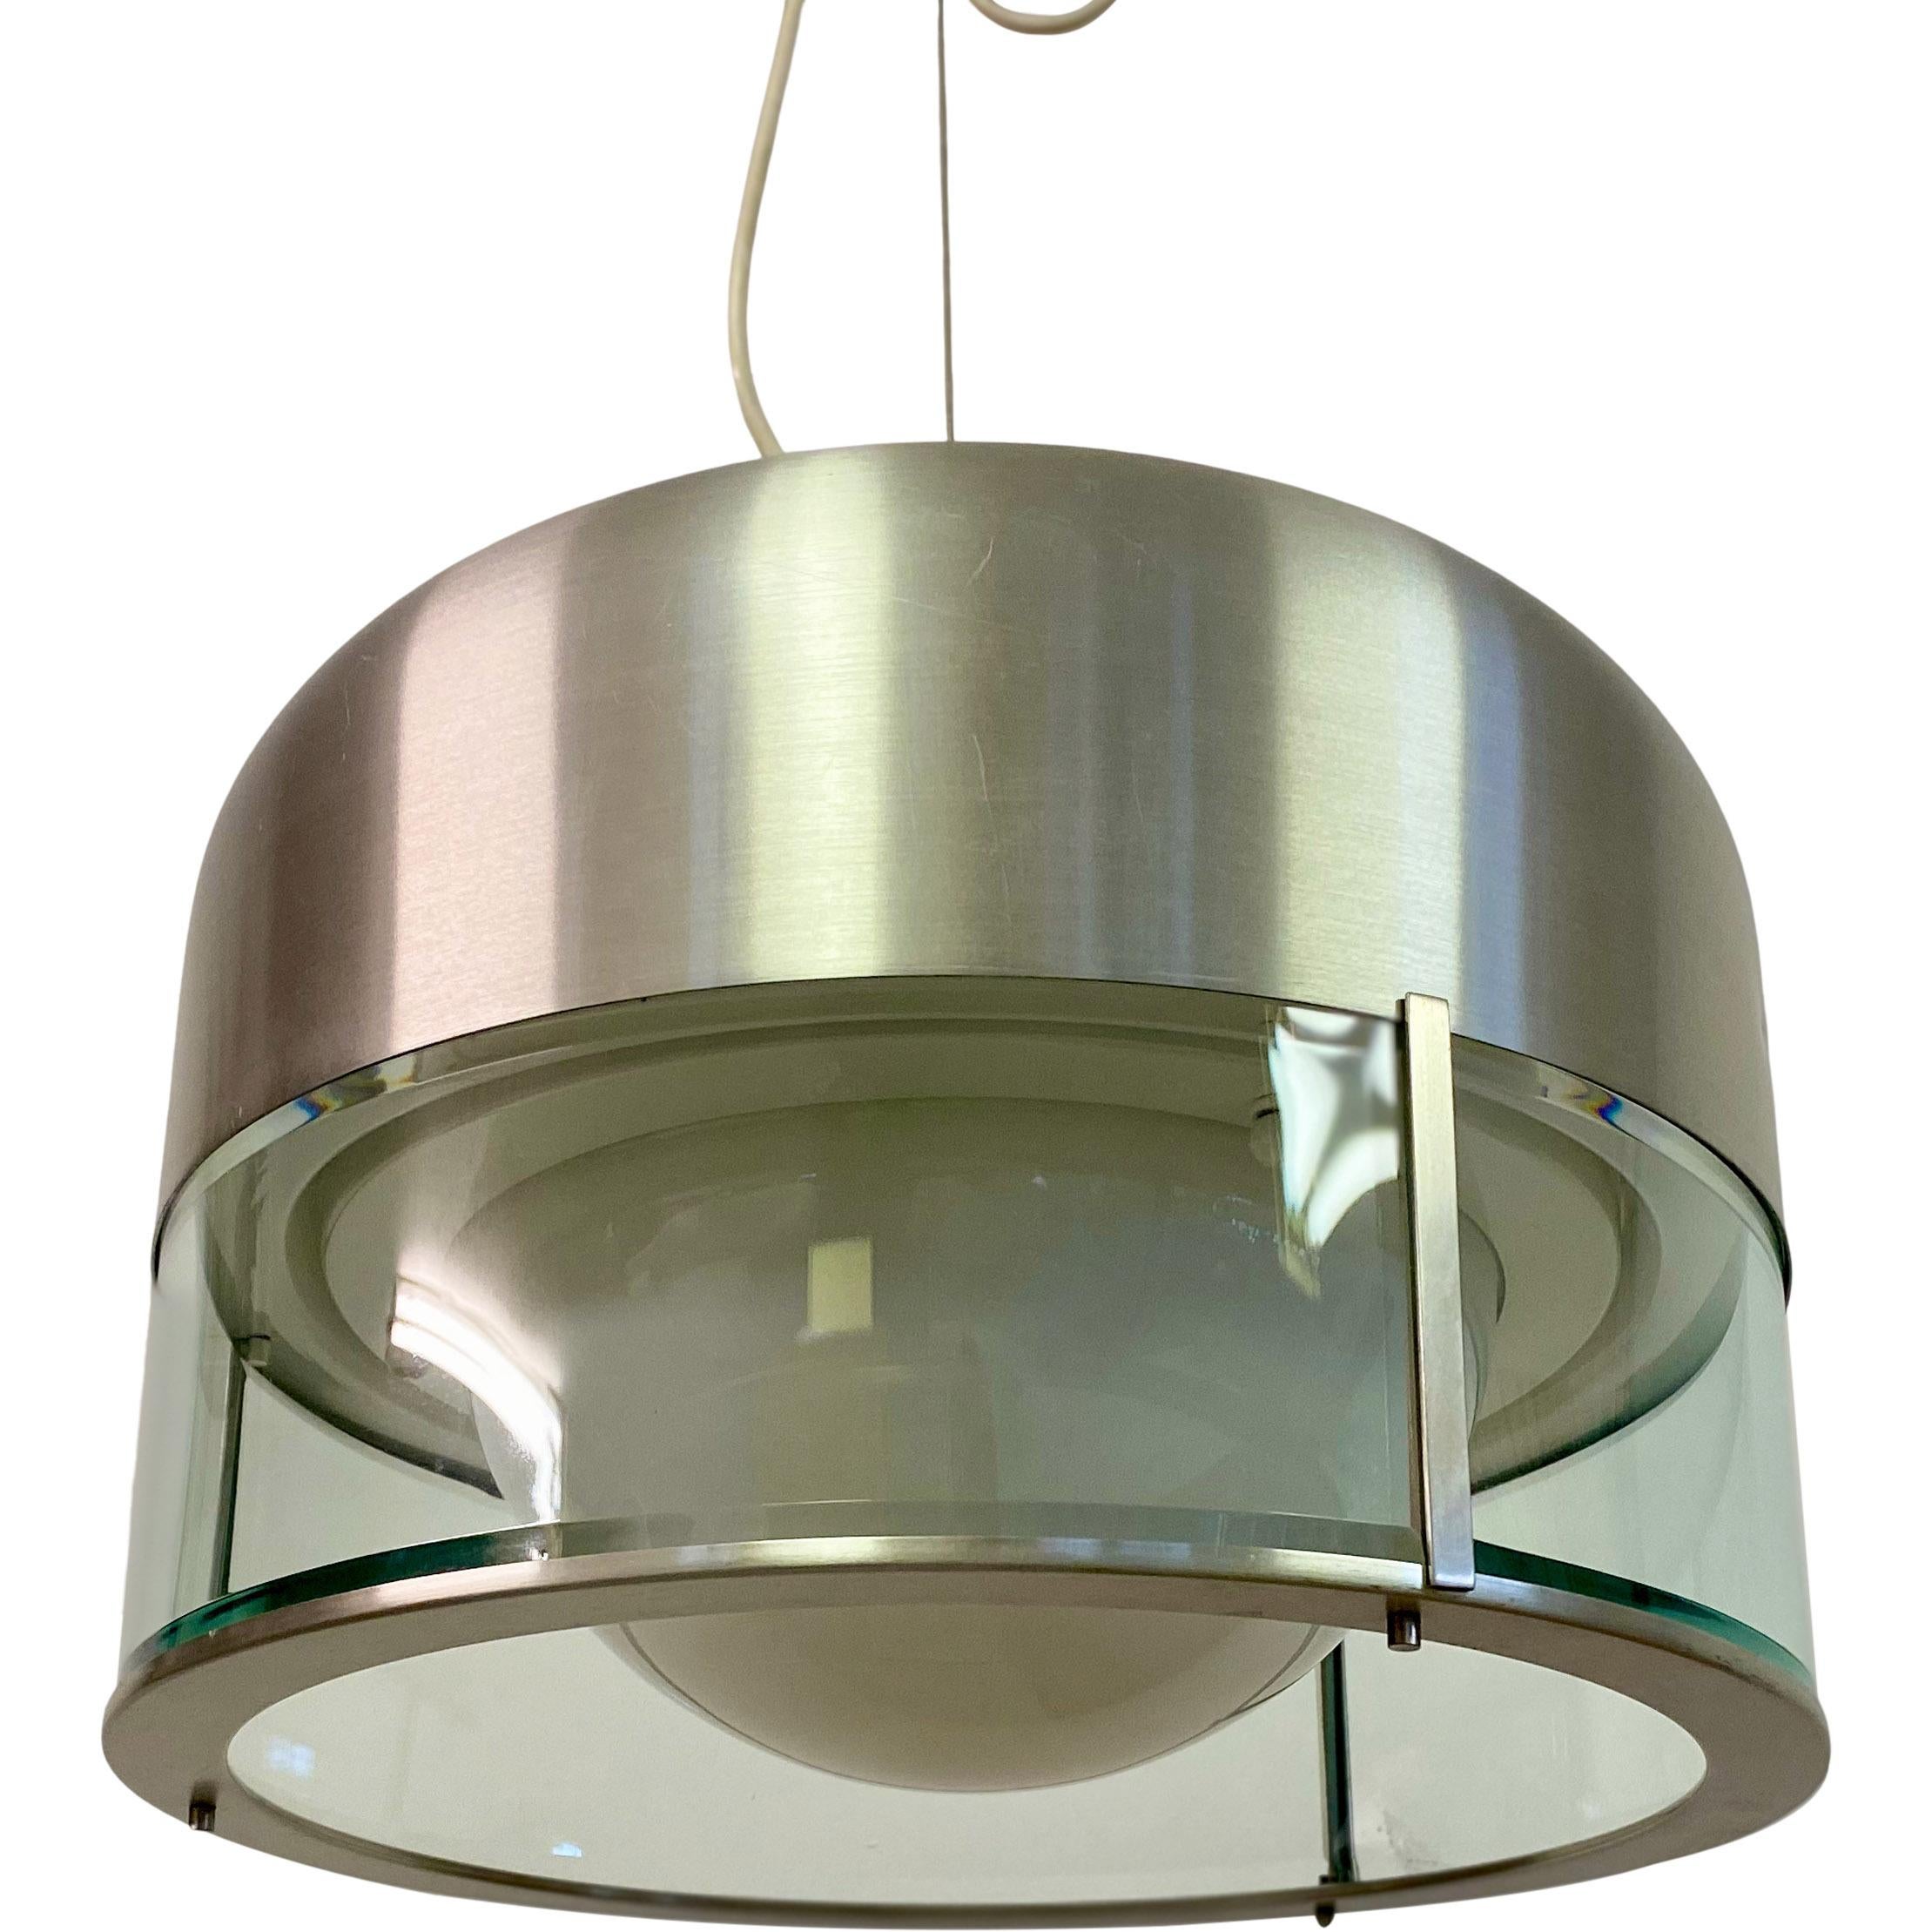 Suspension ceiling light

By Pia Guidetti Crippa 

Manufactured by Lumi

Brushed aluminium body

Glass diffuser

Labelled

Body of light measures 28cm high

Total height can be adjusted

Italy 1960s.